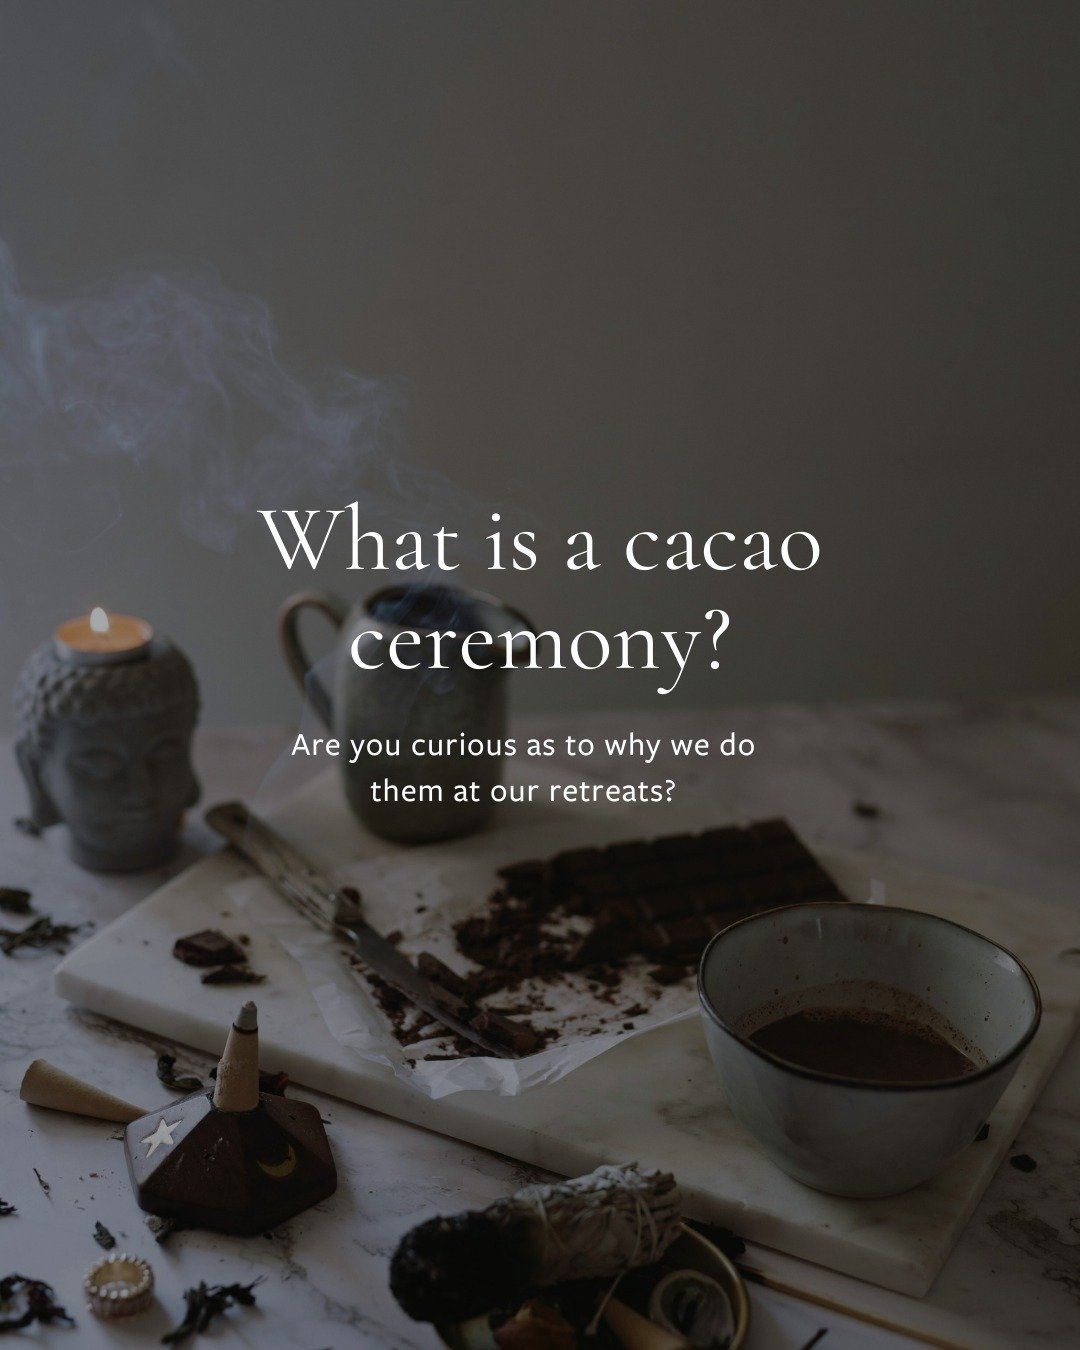 Cacao ceremonies are becoming more and more popular as spaces for people to connect with others &ndash; and reconnect with the self &ndash; in new ways.

We incorporate them into our retreats as we believe this too.
At its core, a cacao ceremony is a